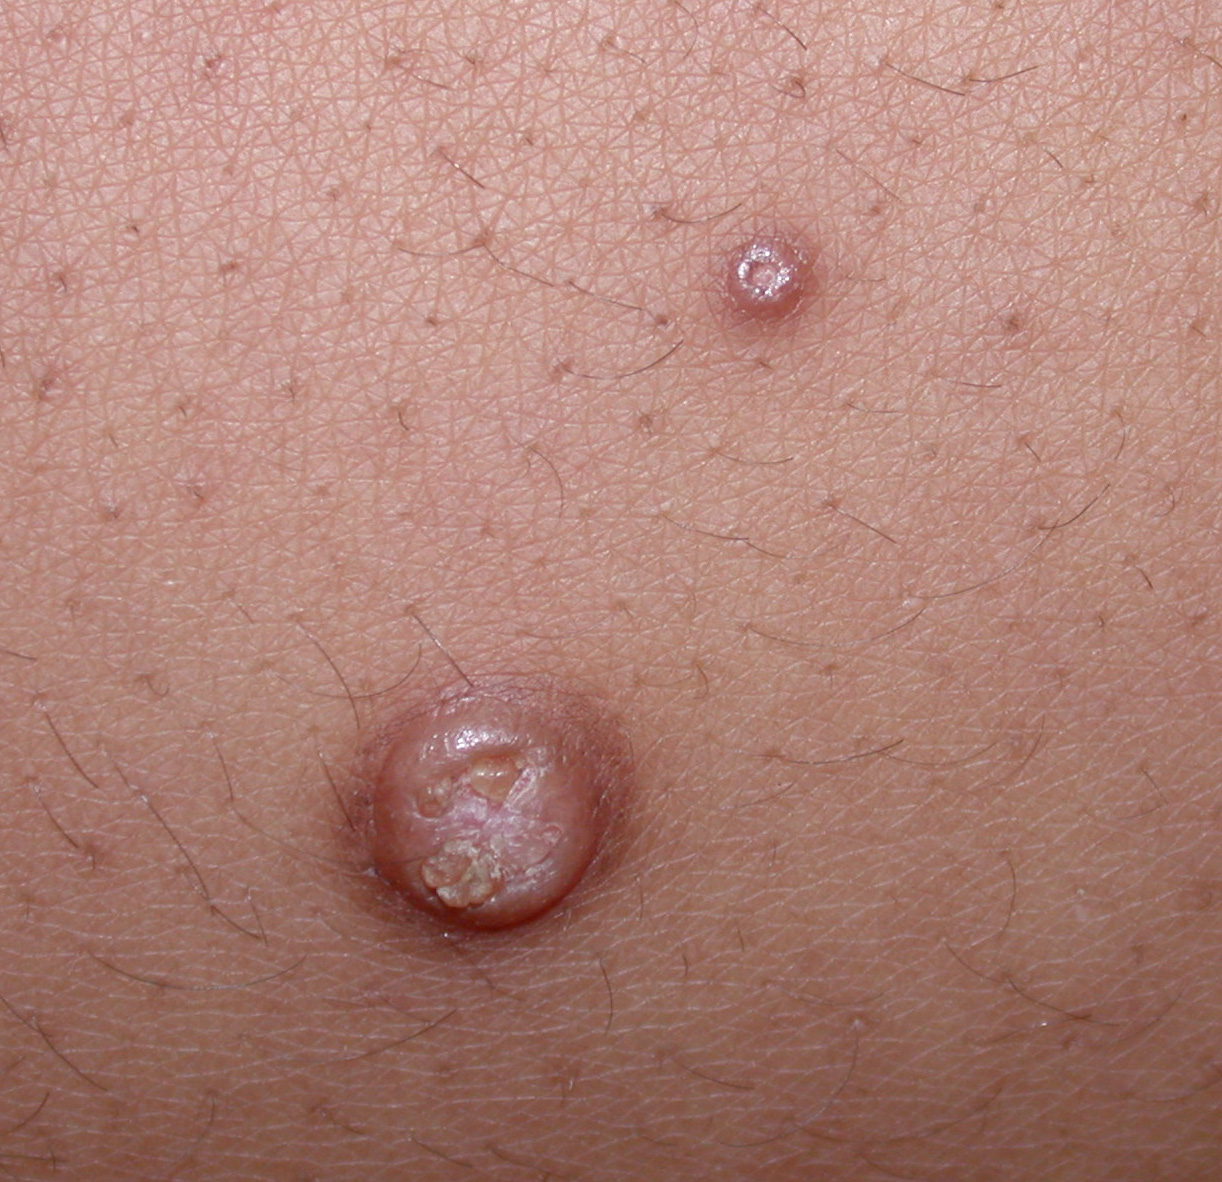 Molluscum Contagiosum or Genital Warts? (Photos and pictures)